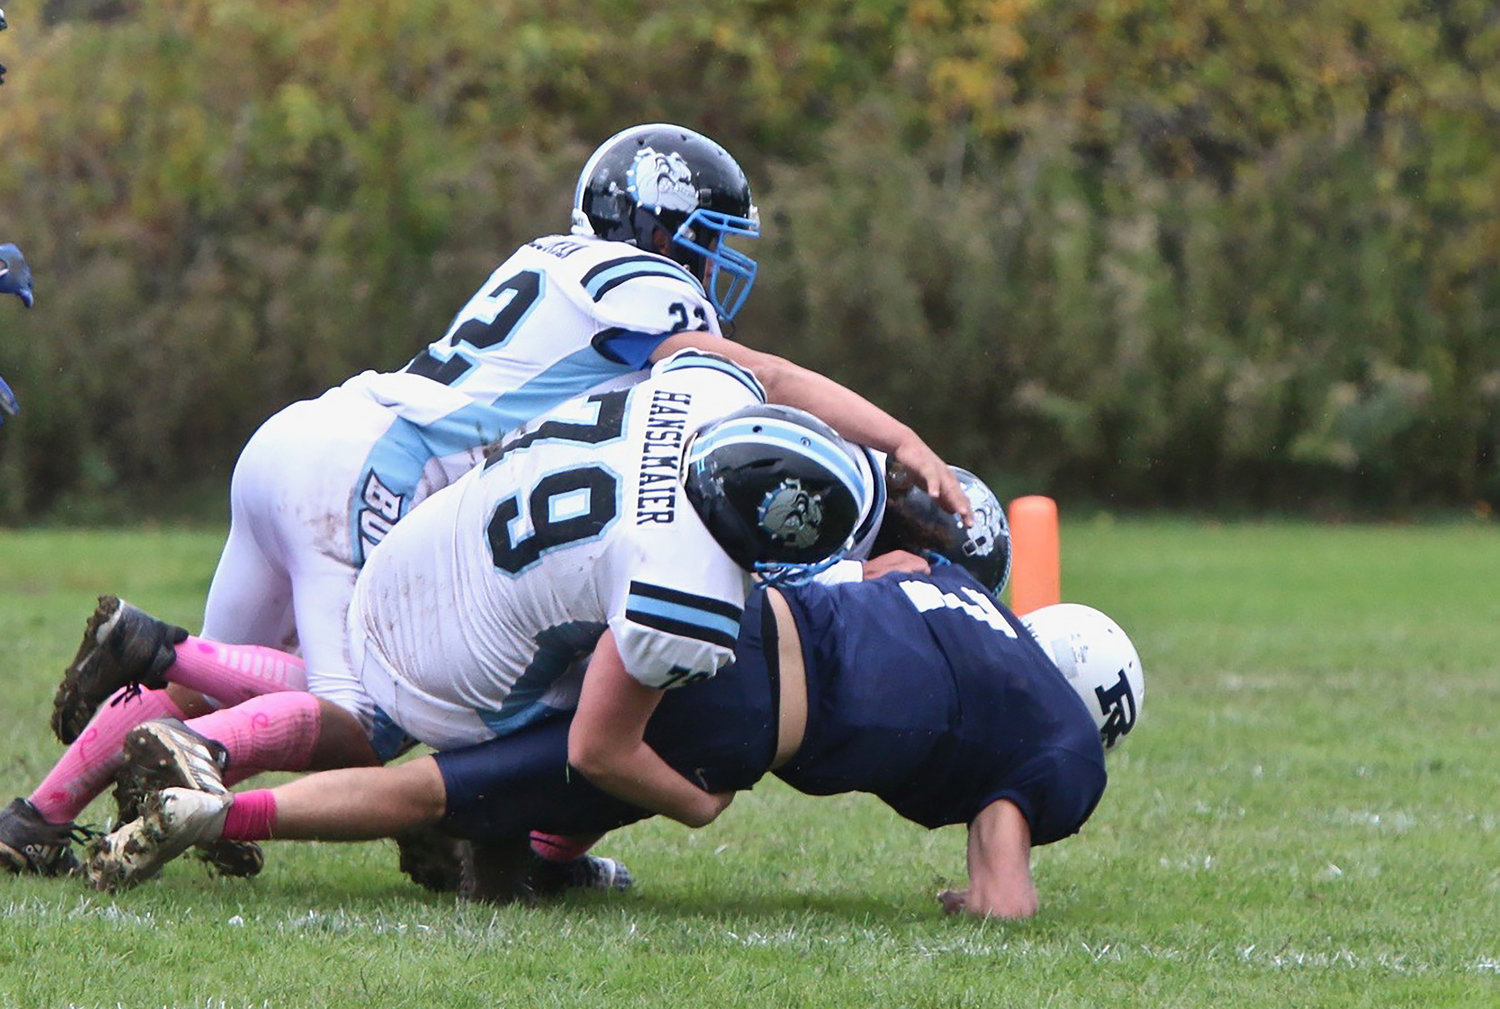 Defense will be key if the Bulldogs are going to prevail against Pawling. Good hard-hitting tackling like the kind evinced by junior Dillan Hanslmaier and sophomore Jakob Halloran was on display in this bone-crunching tackle of Roscoe junior Anthony Teipelke.